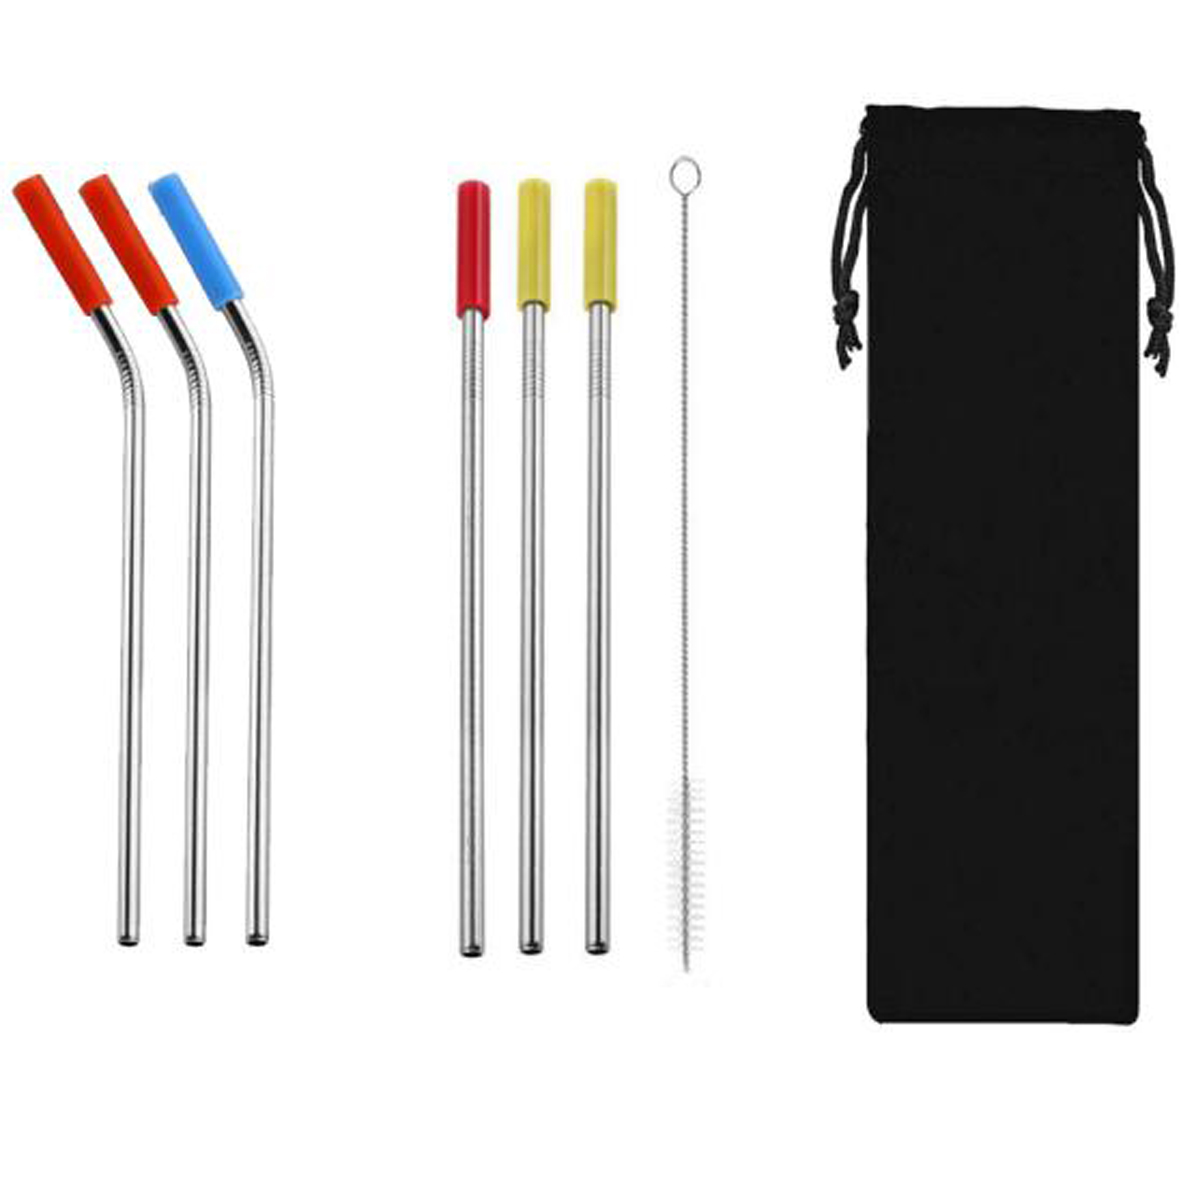 GL-ELY1257 7 in 1 Stainless Steel Straw Set with Rubber Tip